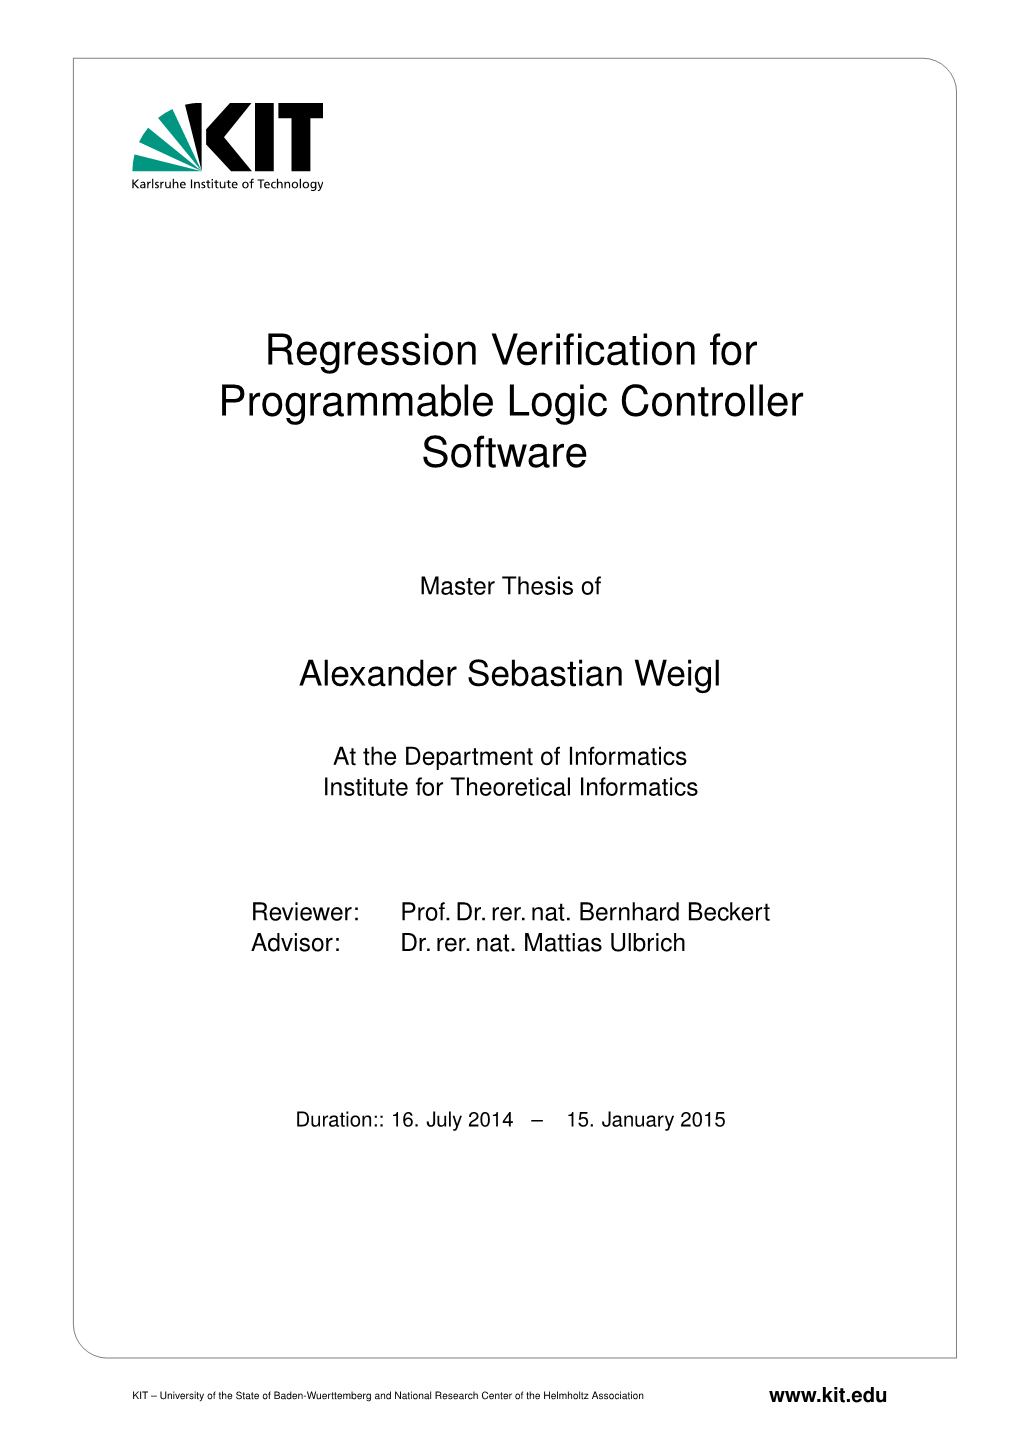 Regression Verification for Programmable Logic Controller